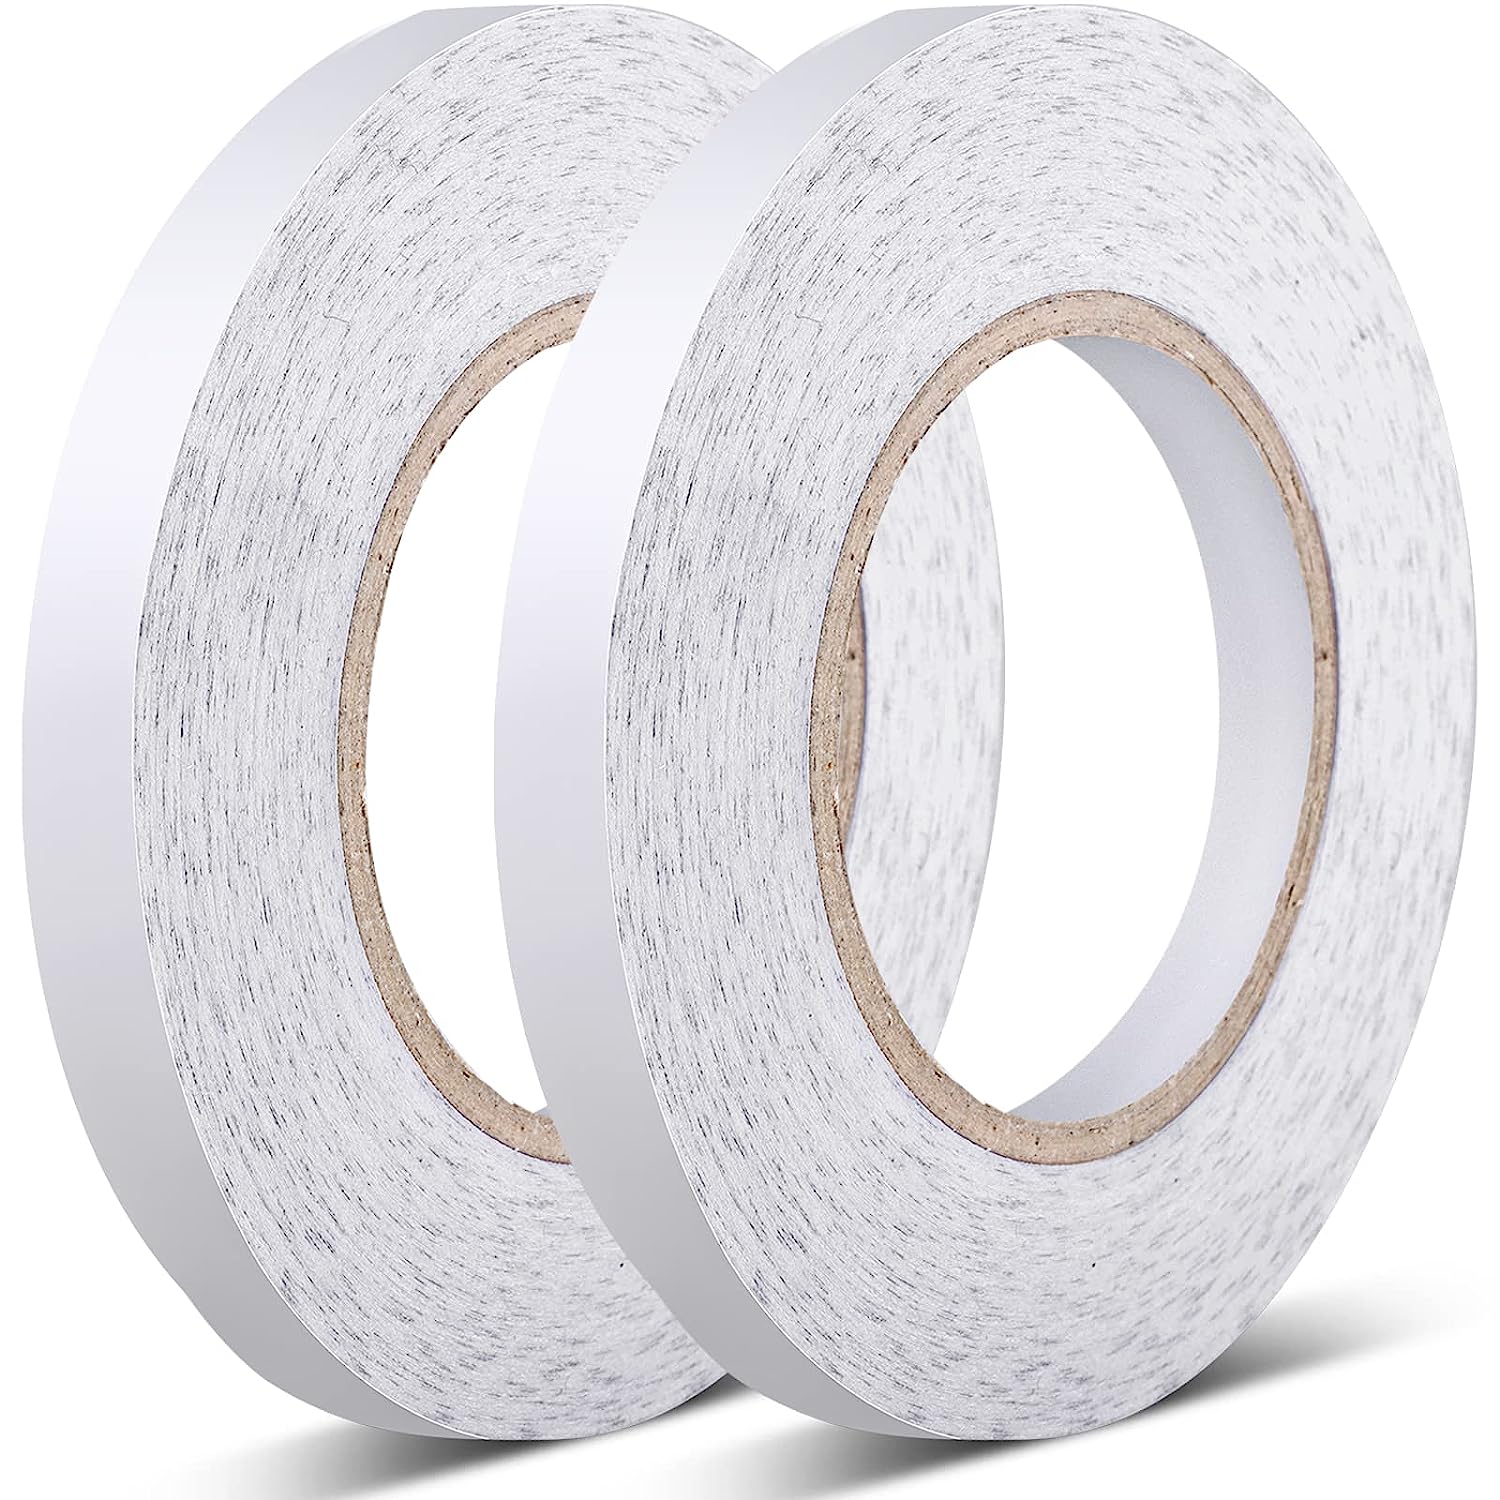 Outus Sticky Fabric Tape Double-Sided Tape Adhesive [...]